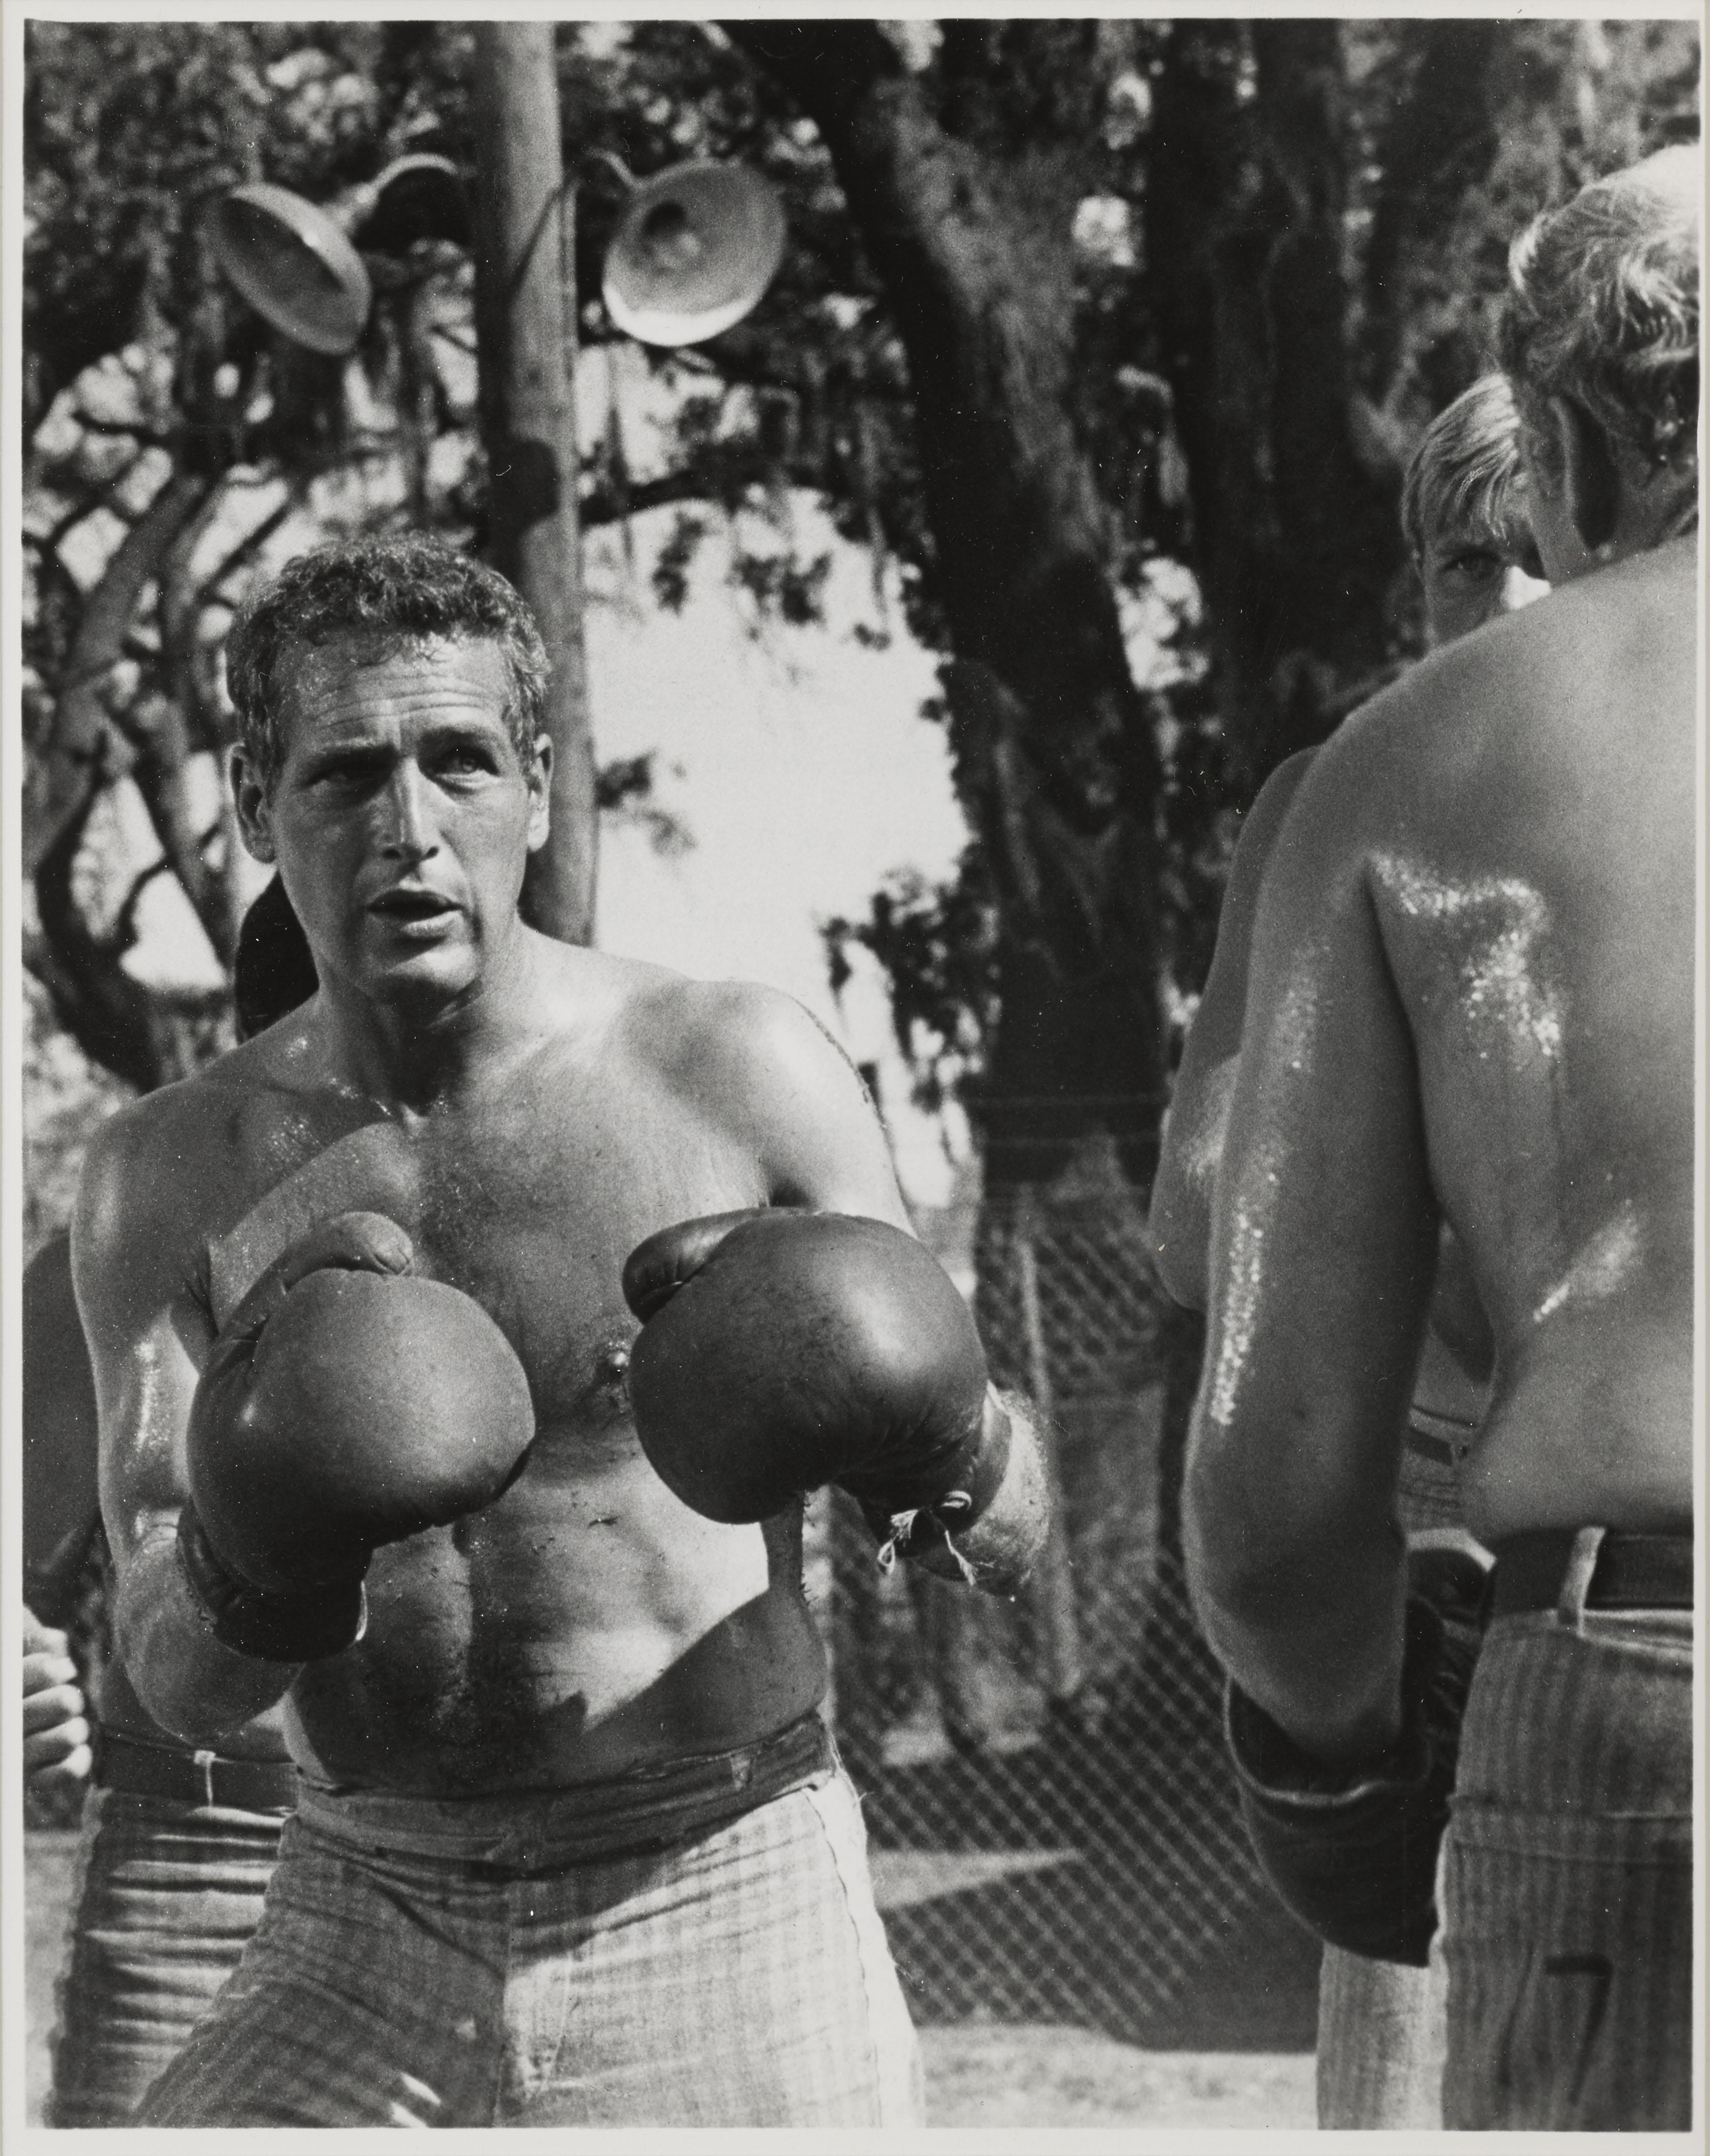 Original US production still.
This film was directed by Stuart Rosenberg, and stars Paul Newman and features George Kennedy, who won an Oscar for Best Supporting Actor. Newman had the leading role as Luke, who was sentenced to two years in a